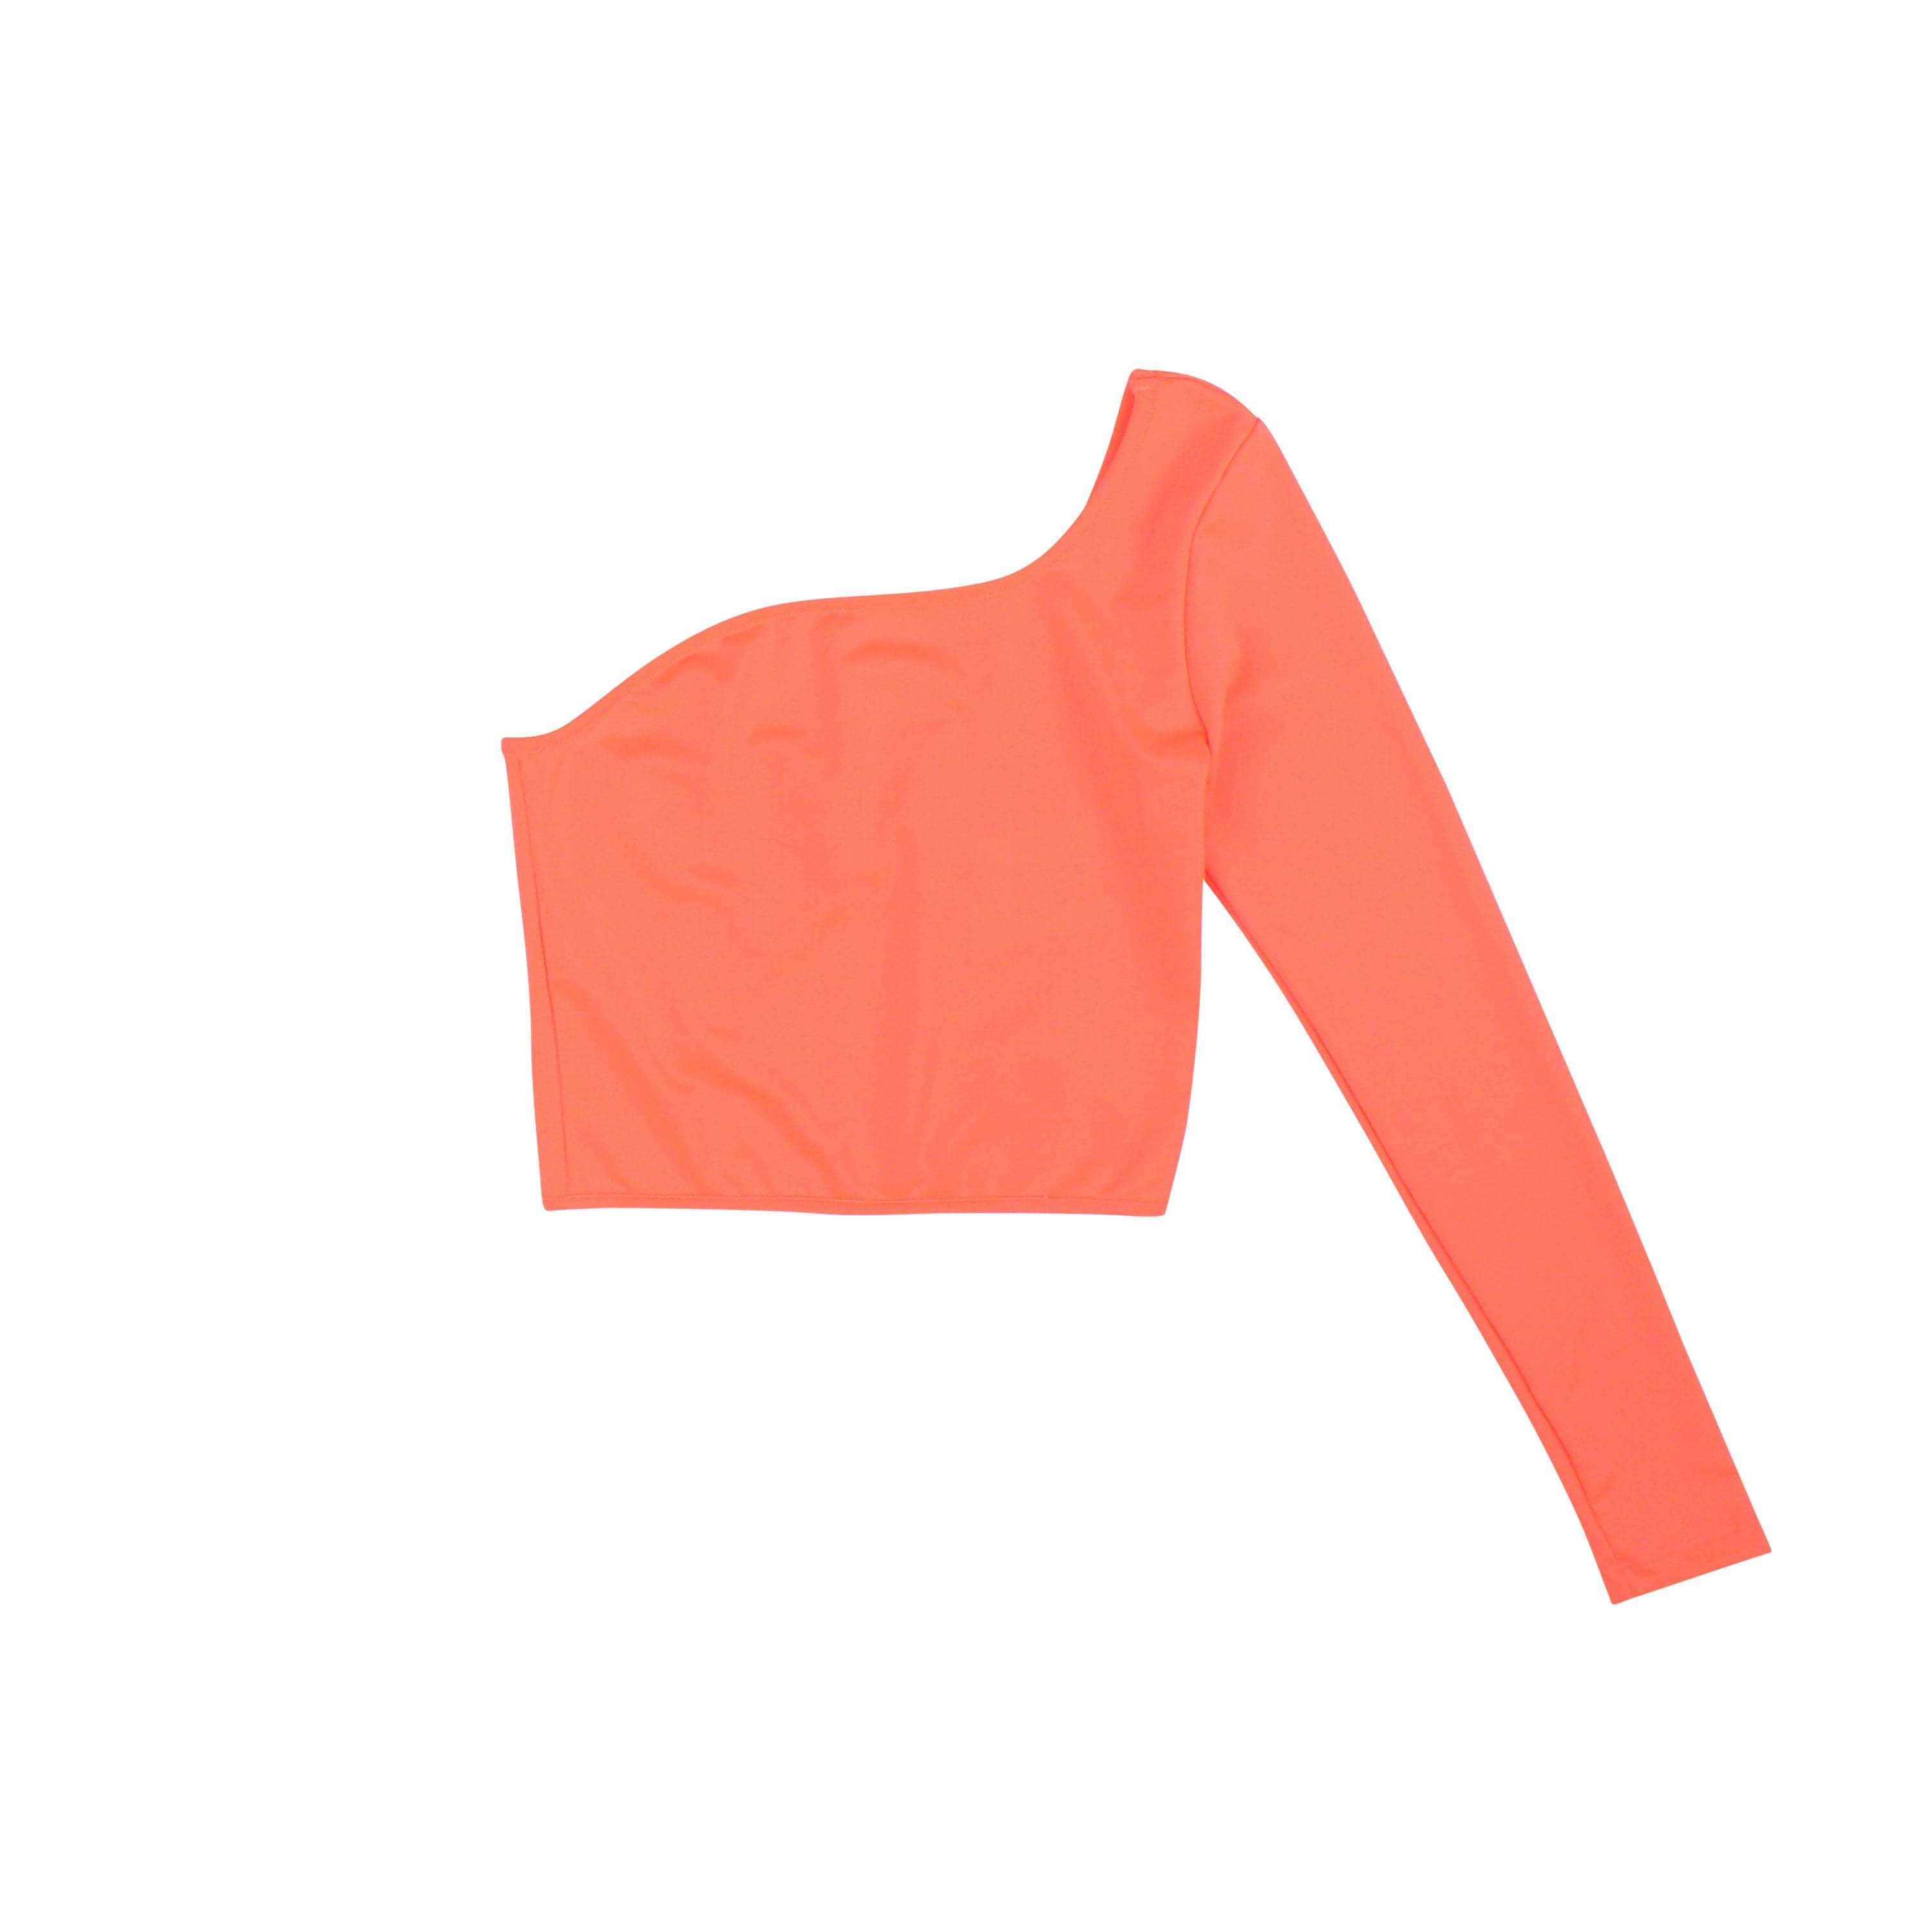 WURST channelenable-all, chicmi, couponcollection, main-clothing, shop375, under-250, womens-crop-tops, wurst S CORAL SINGLE SLEEVE CROP TOP 95-WUT-1002/S 95-WUT-1002/S